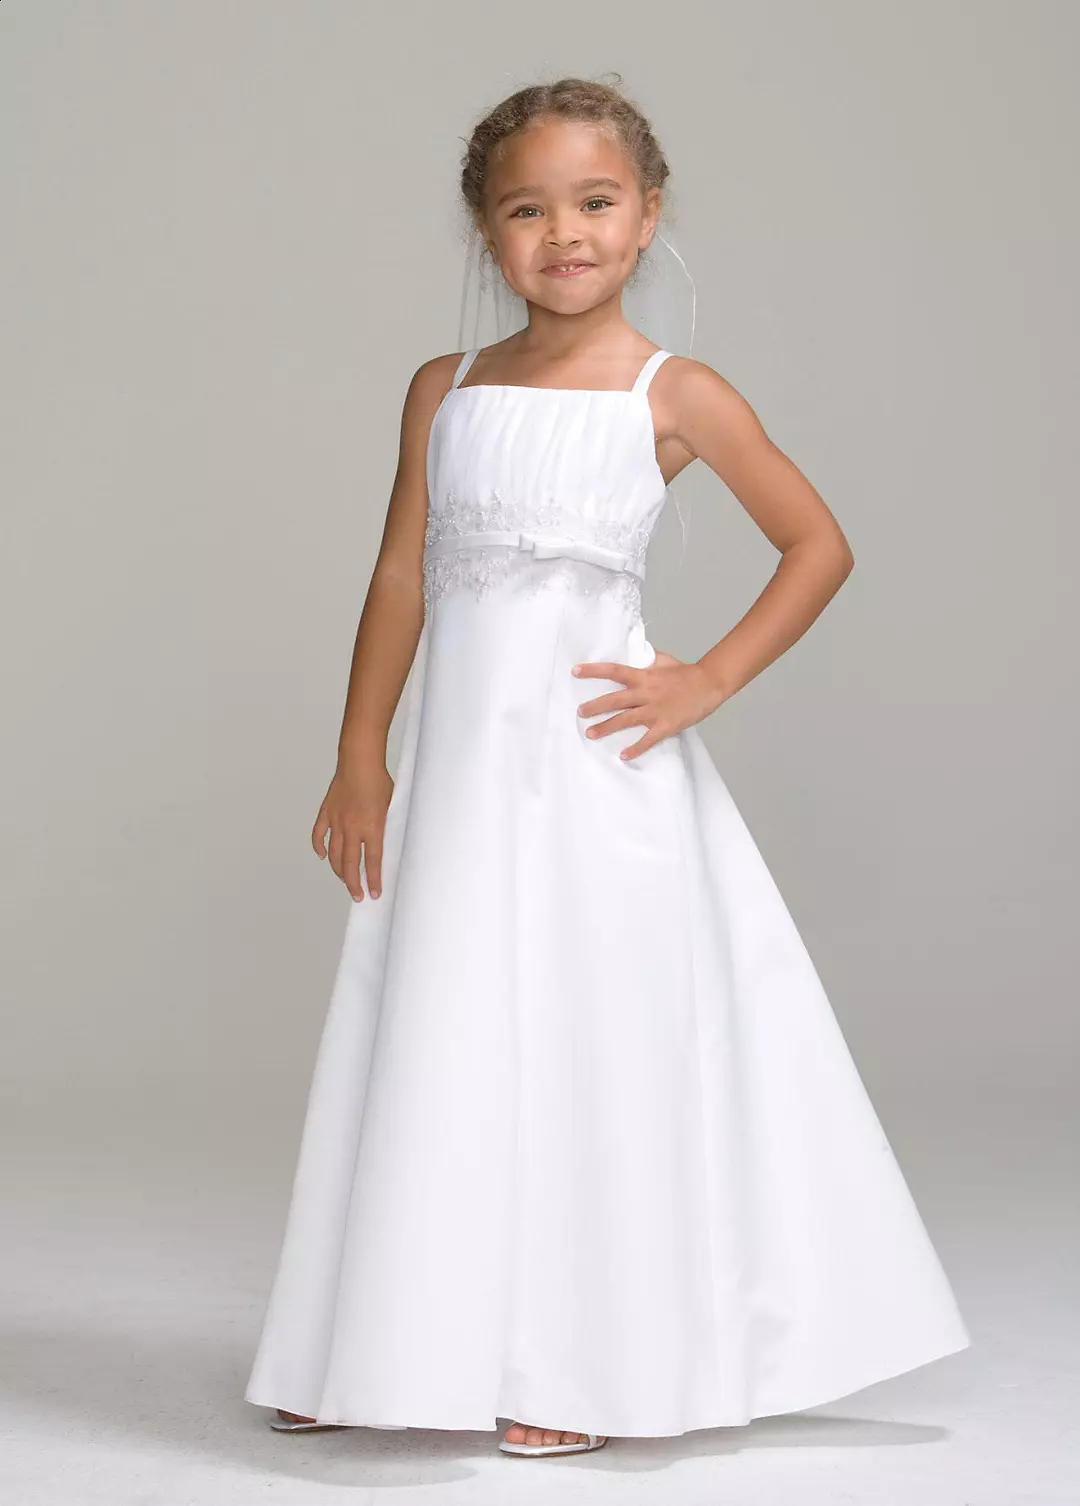 Girls Special Occasion Dress with Long A-Line Skirt Image